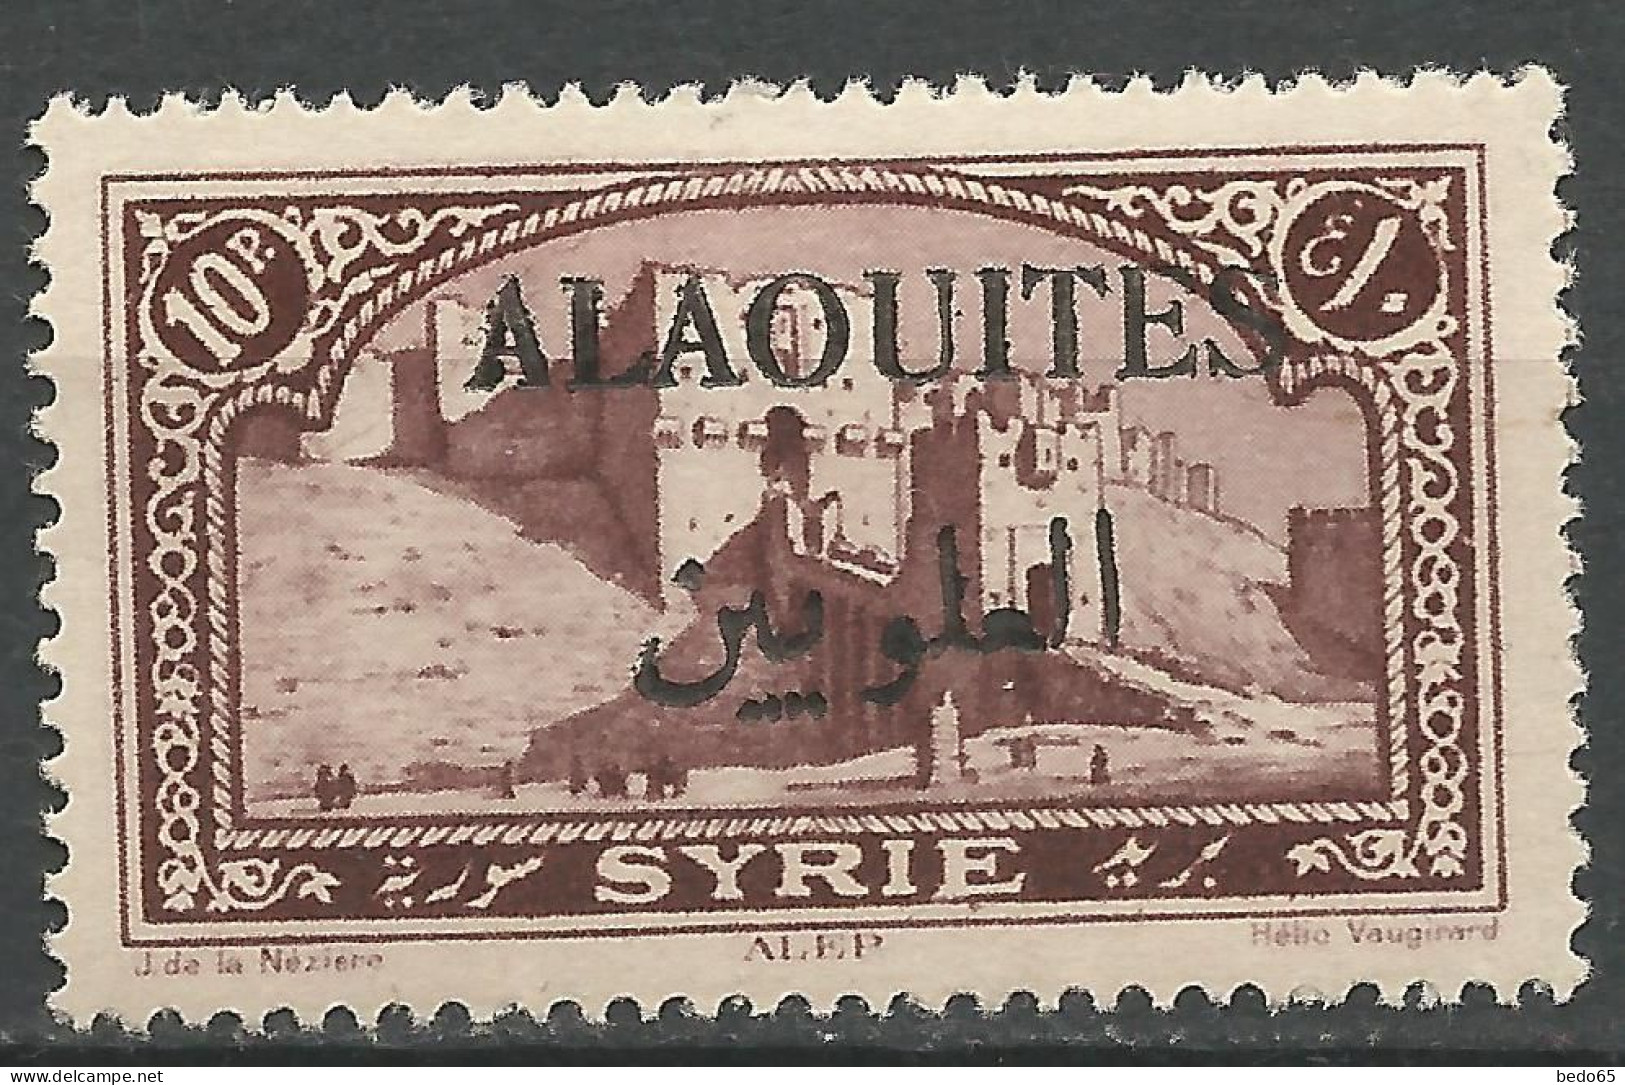 ALAOUITES N° 33 NEUF* TRACE DE CHARNIERE / Hinge / MH - Unused Stamps